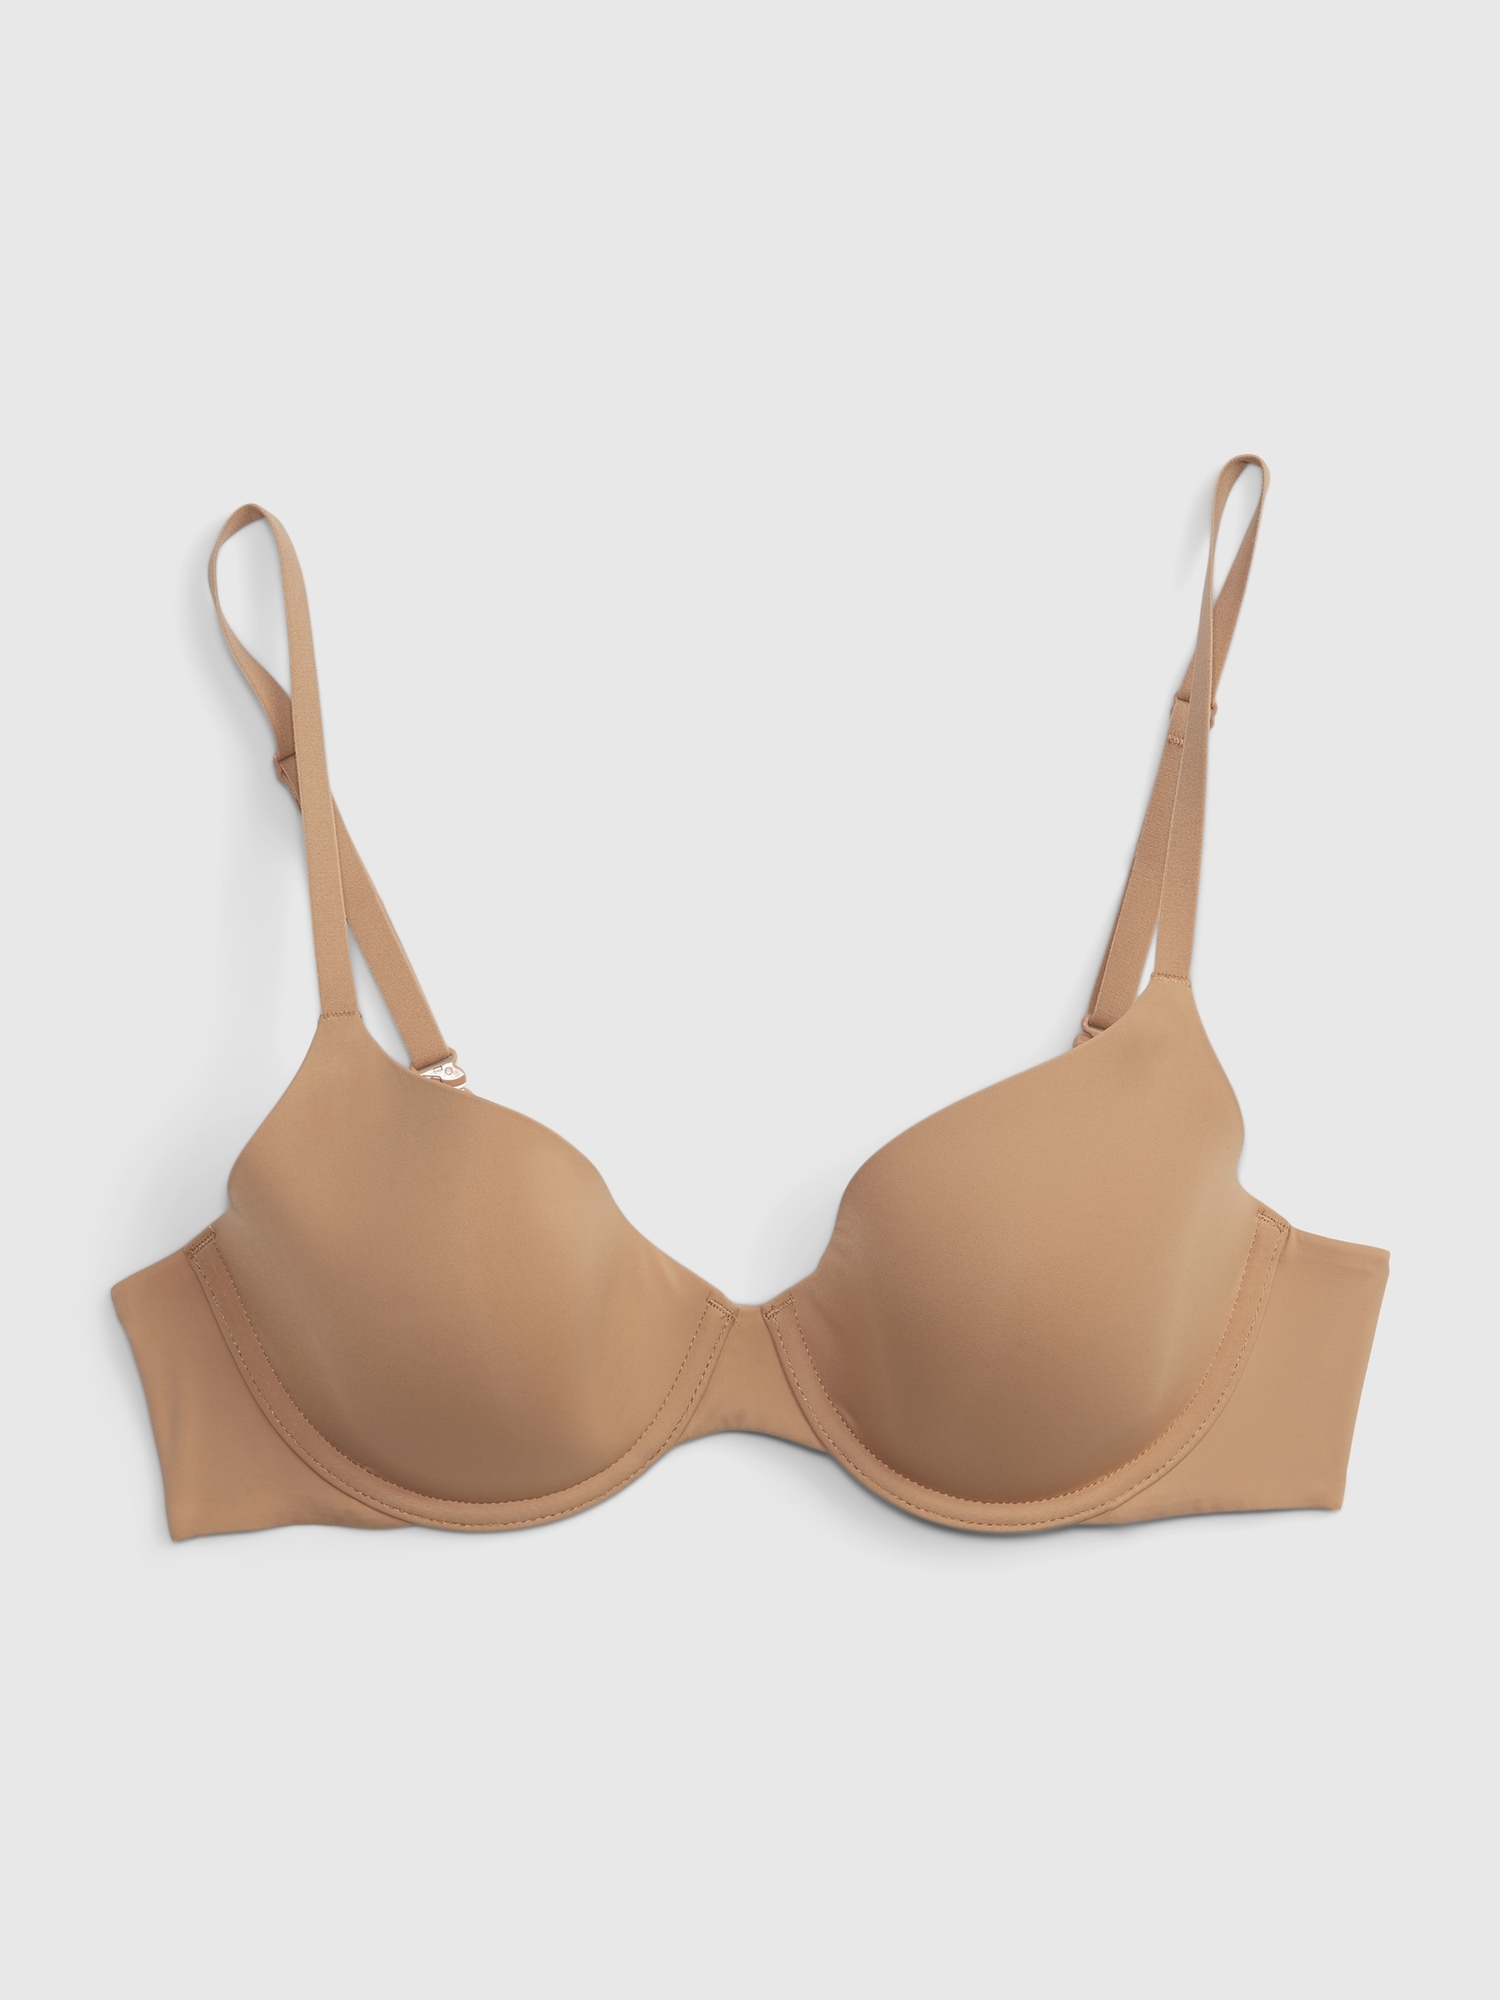 PLANETinner Polycotton T Shirt Bra C-Cup - 011, For Inner Wear at